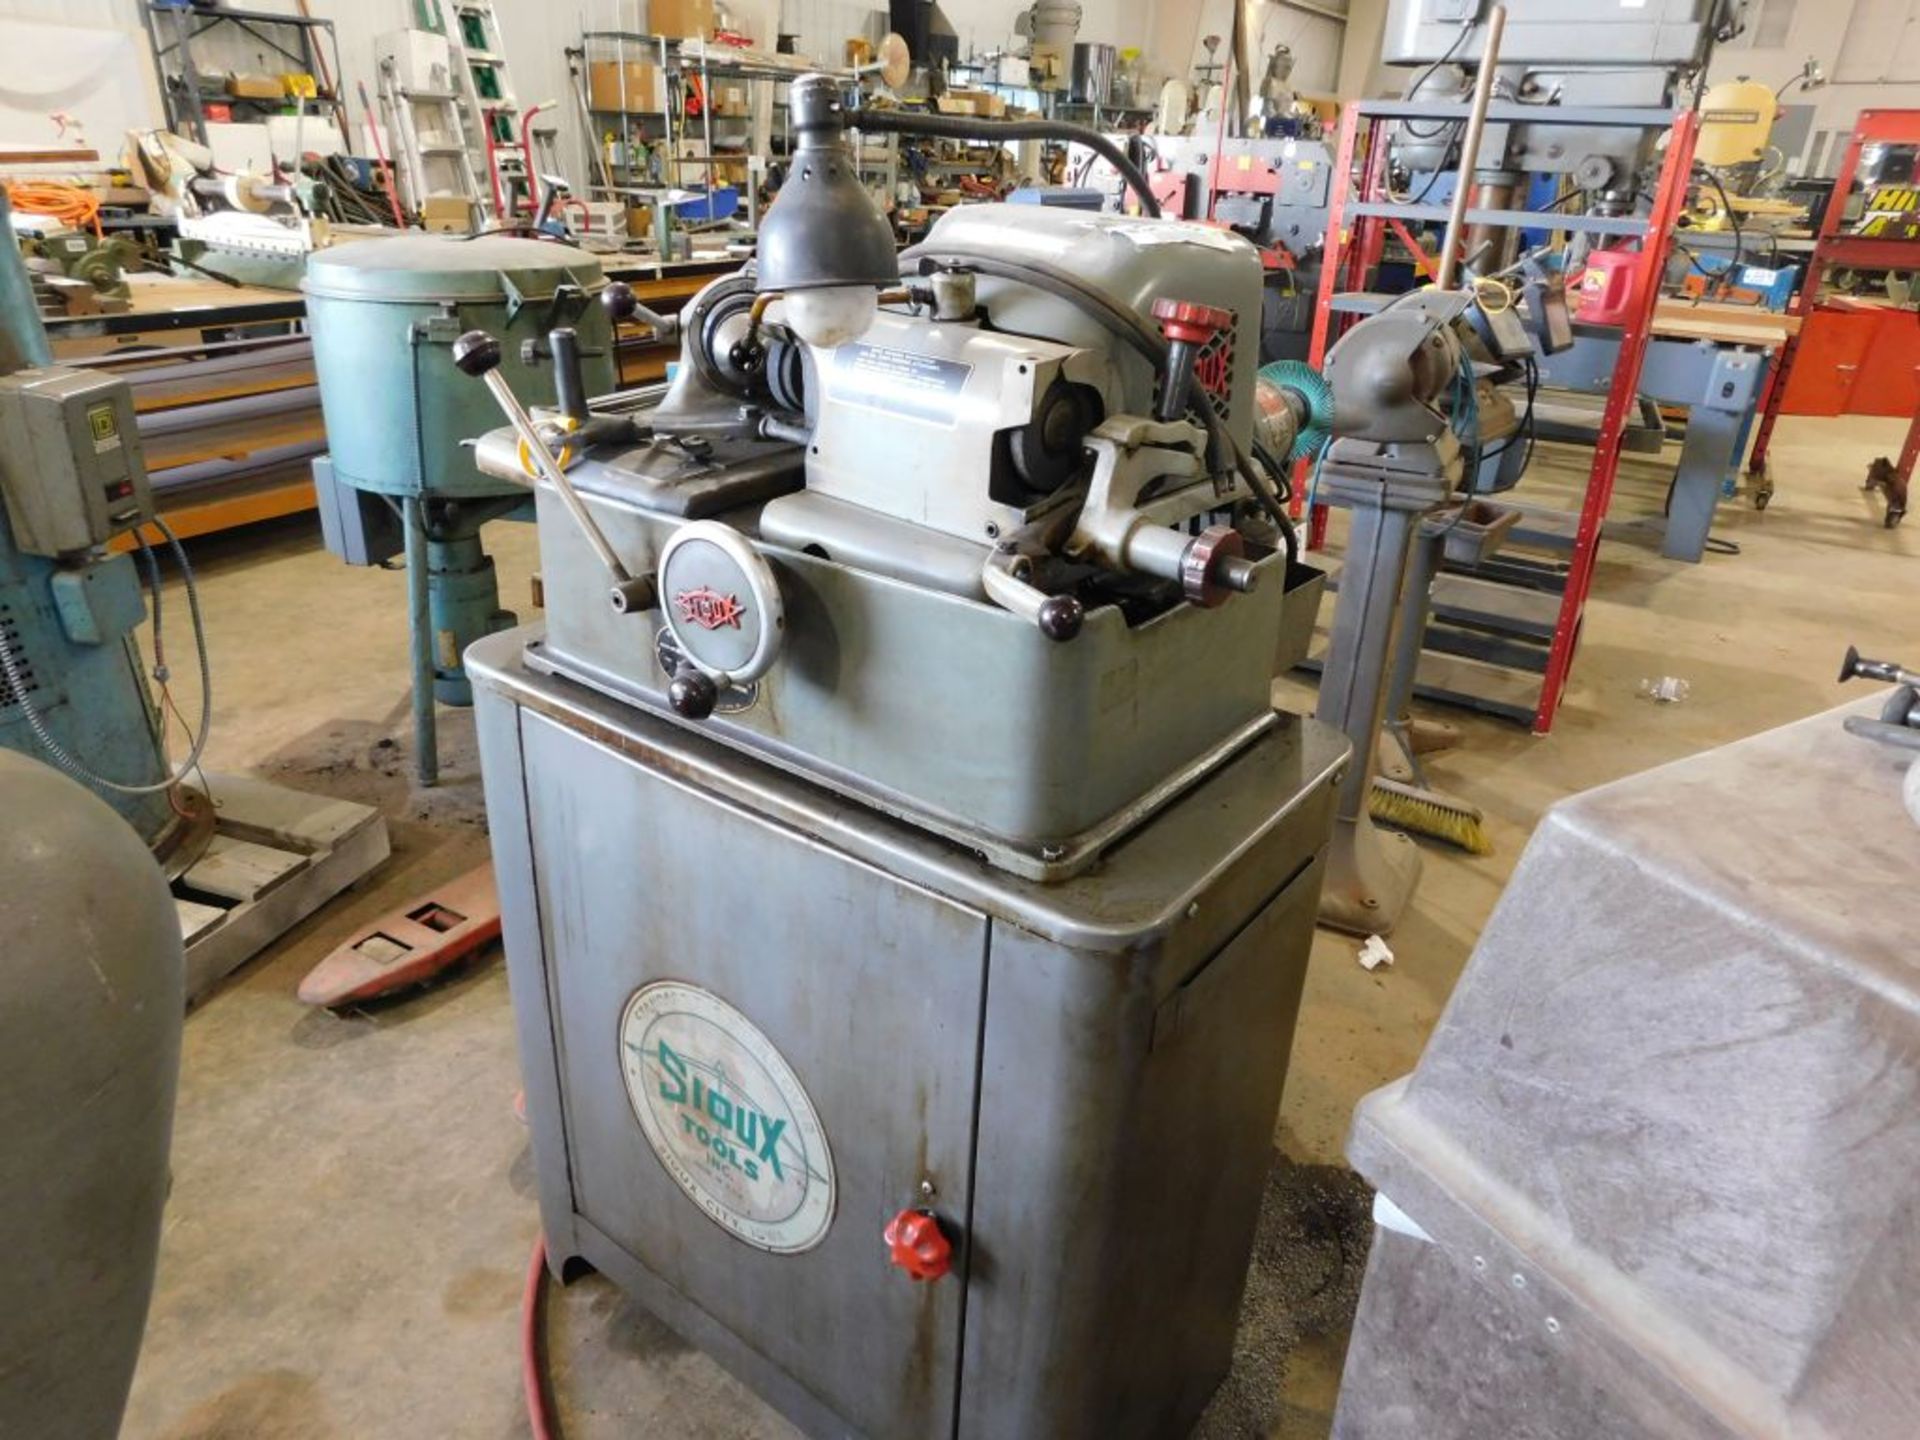 Sioux valve face grinding machine, model 645L, sn 62317, 115 volt. - Image 2 of 6